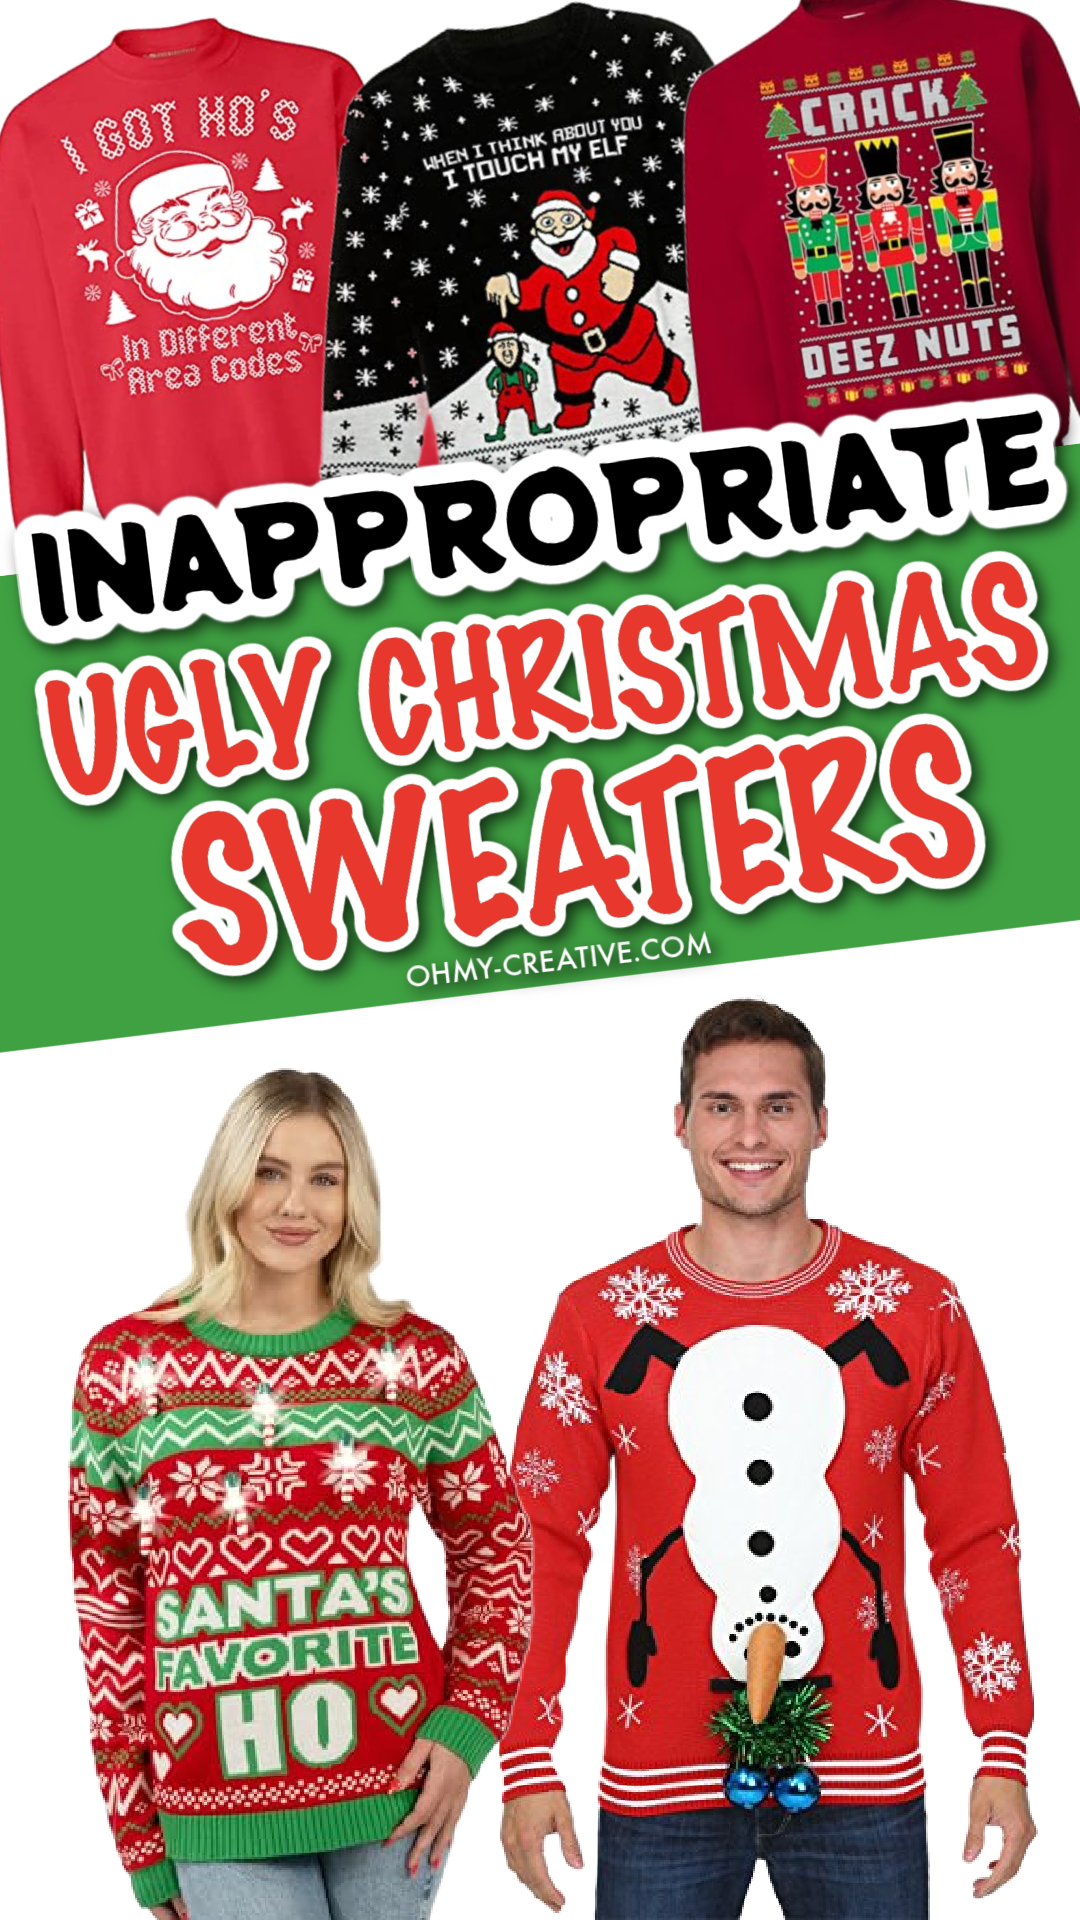 a collage of men's and women's inappropriate Christmas sweaters